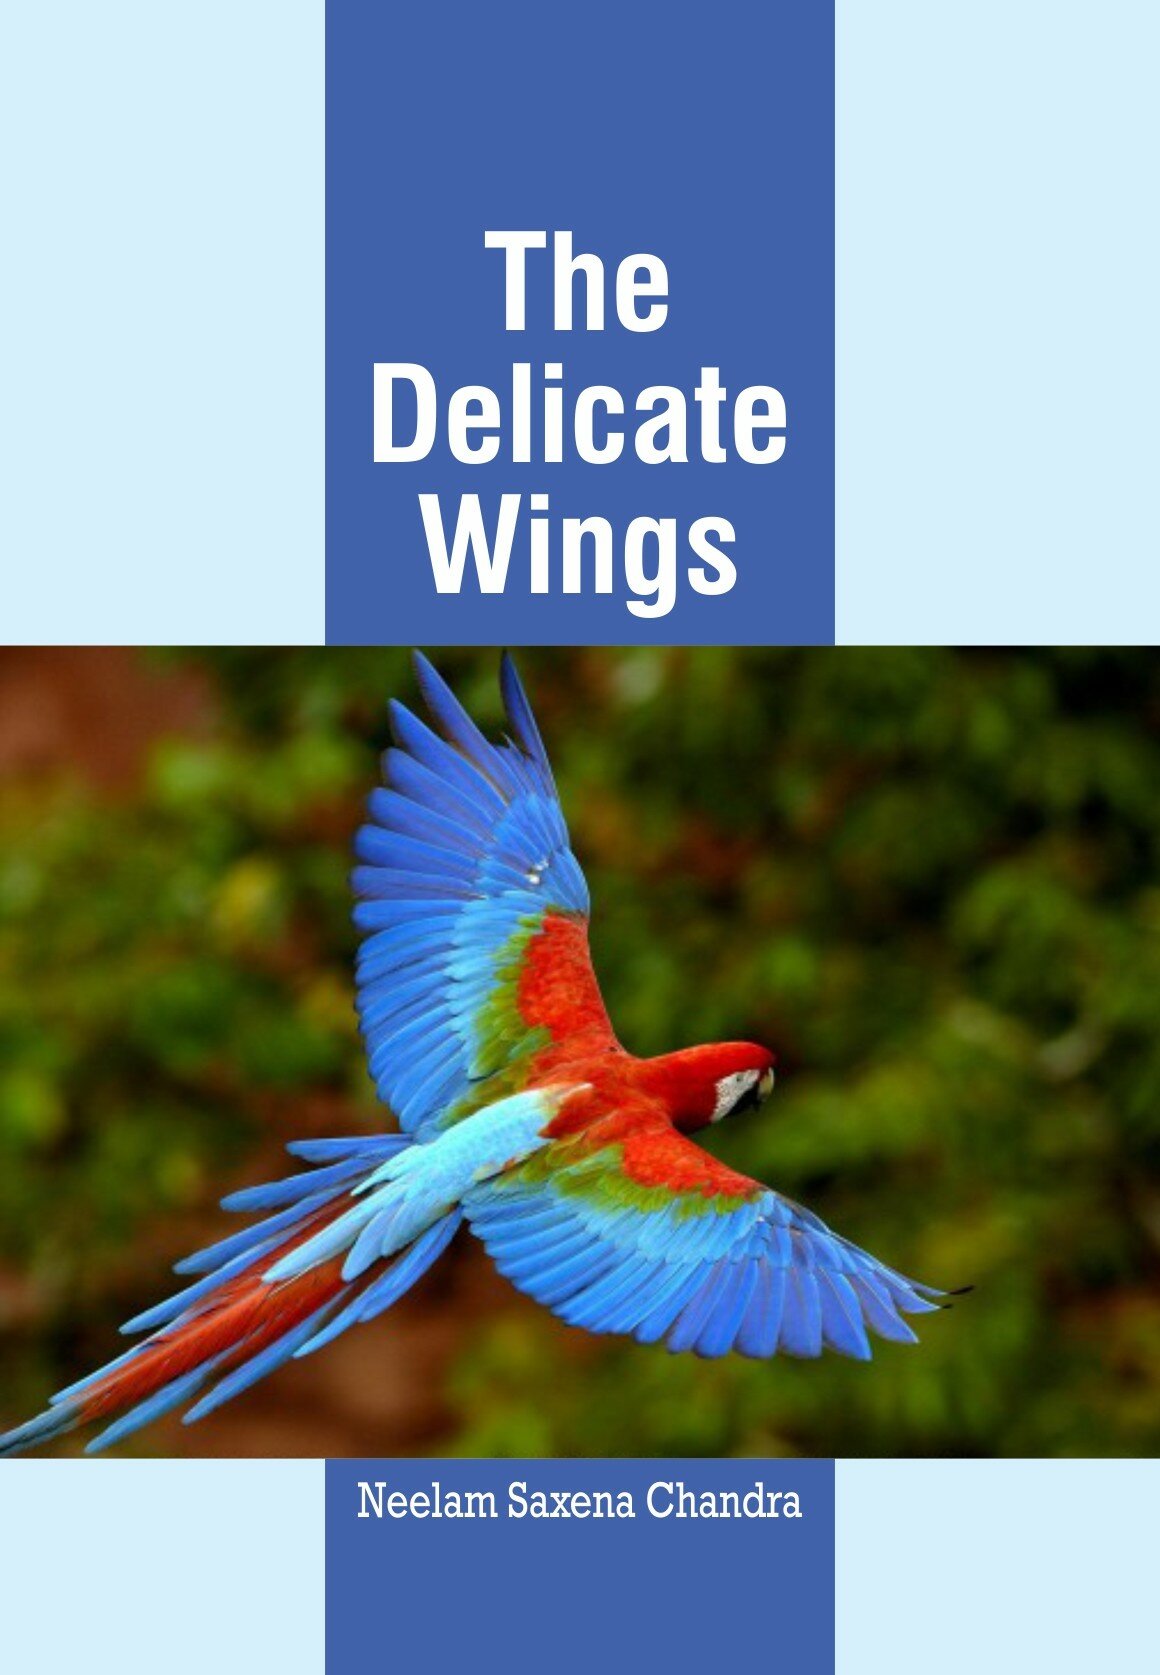 The Delicate Wings